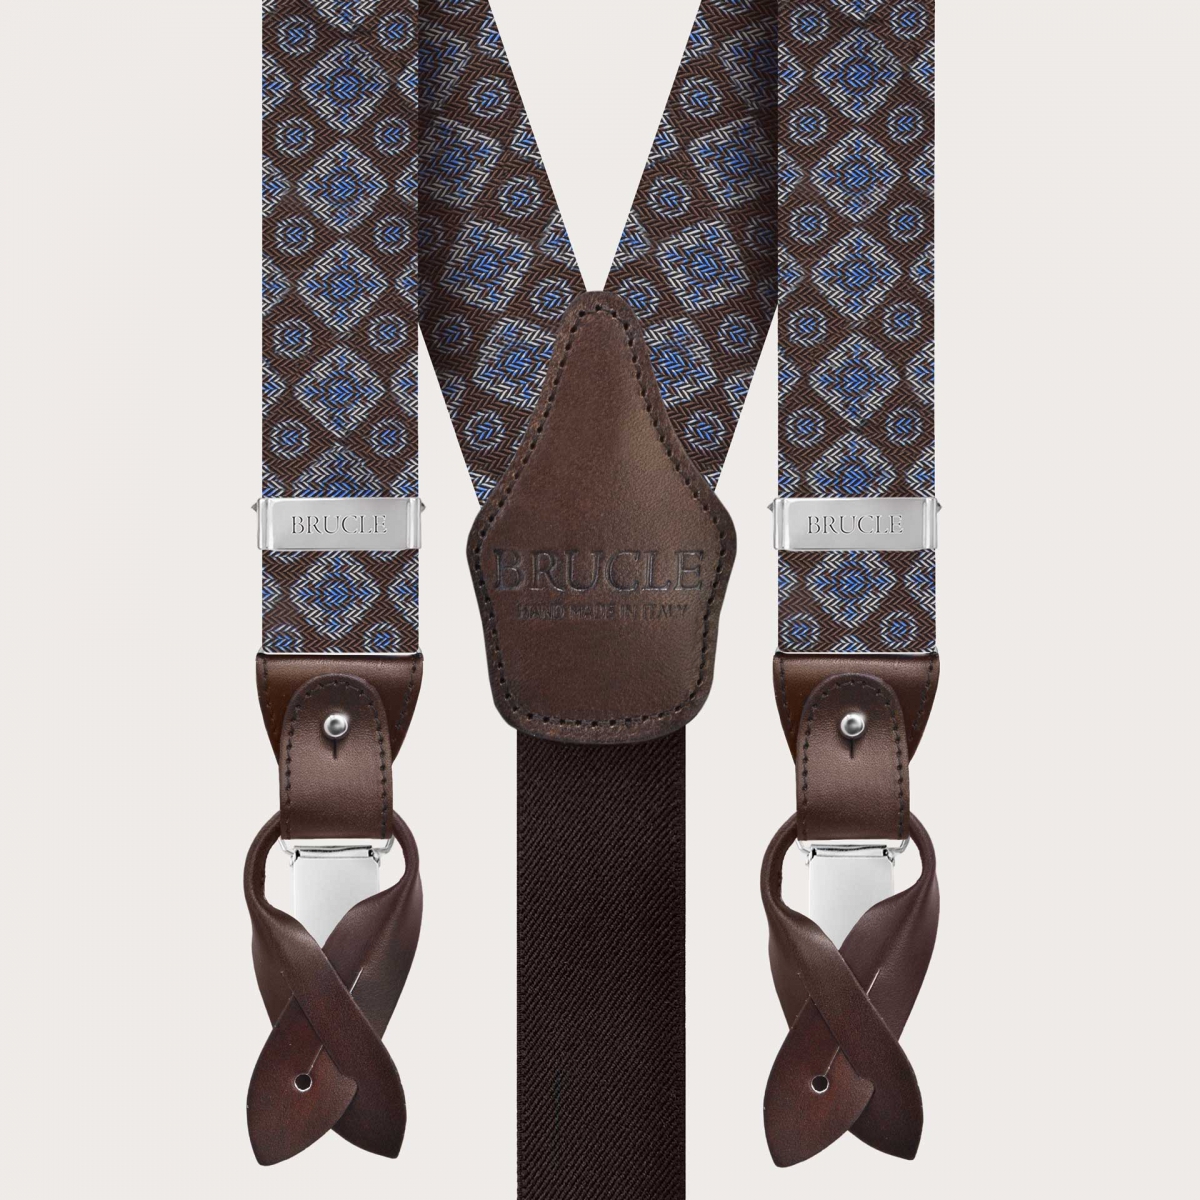 BRUCLE Elegant brown silk suspenders with a geometric pattern in tones of blue and white